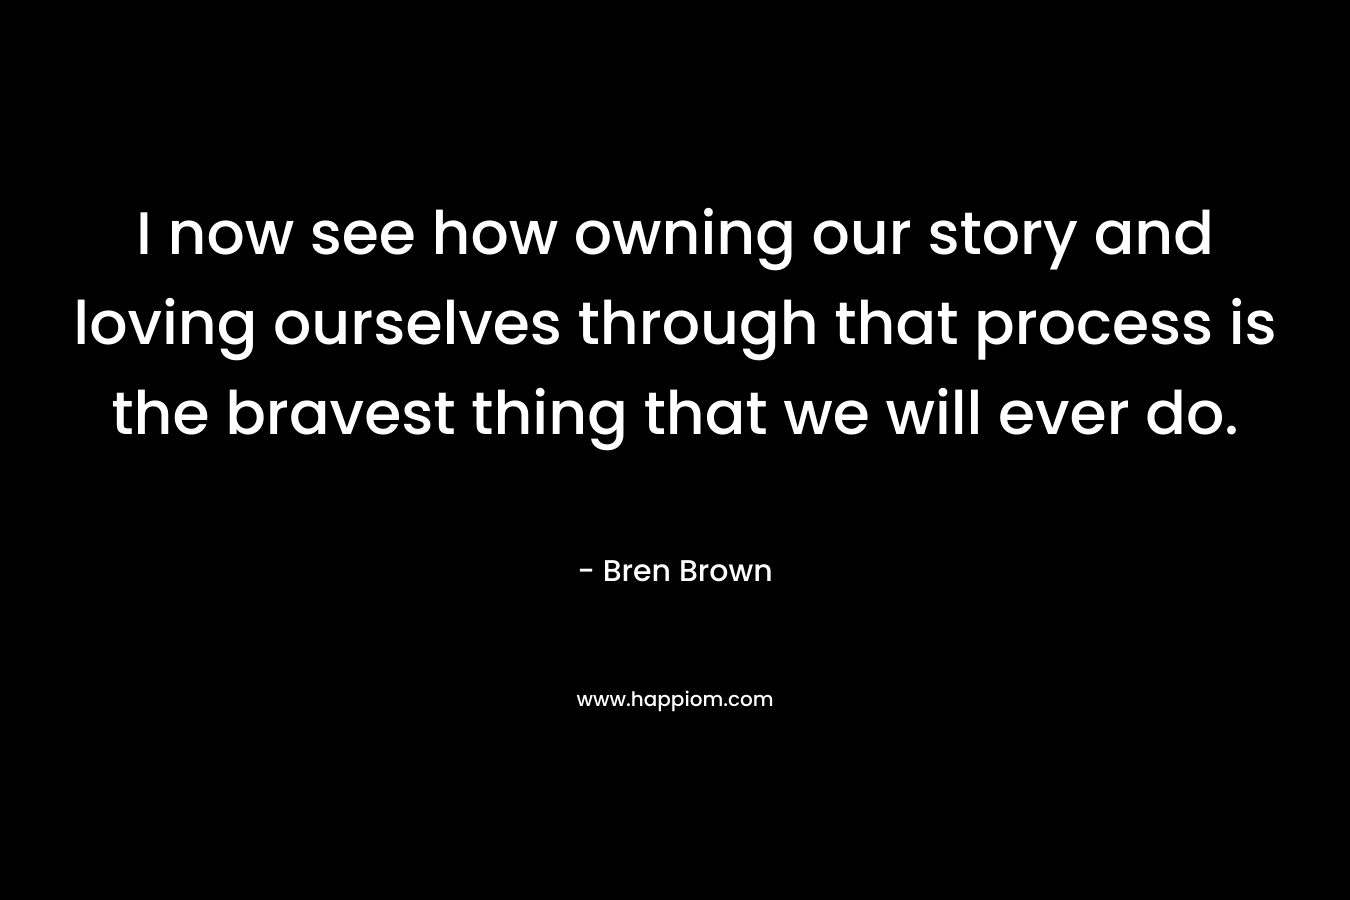 I now see how owning our story and loving ourselves through that process is the bravest thing that we will ever do. – Bren Brown